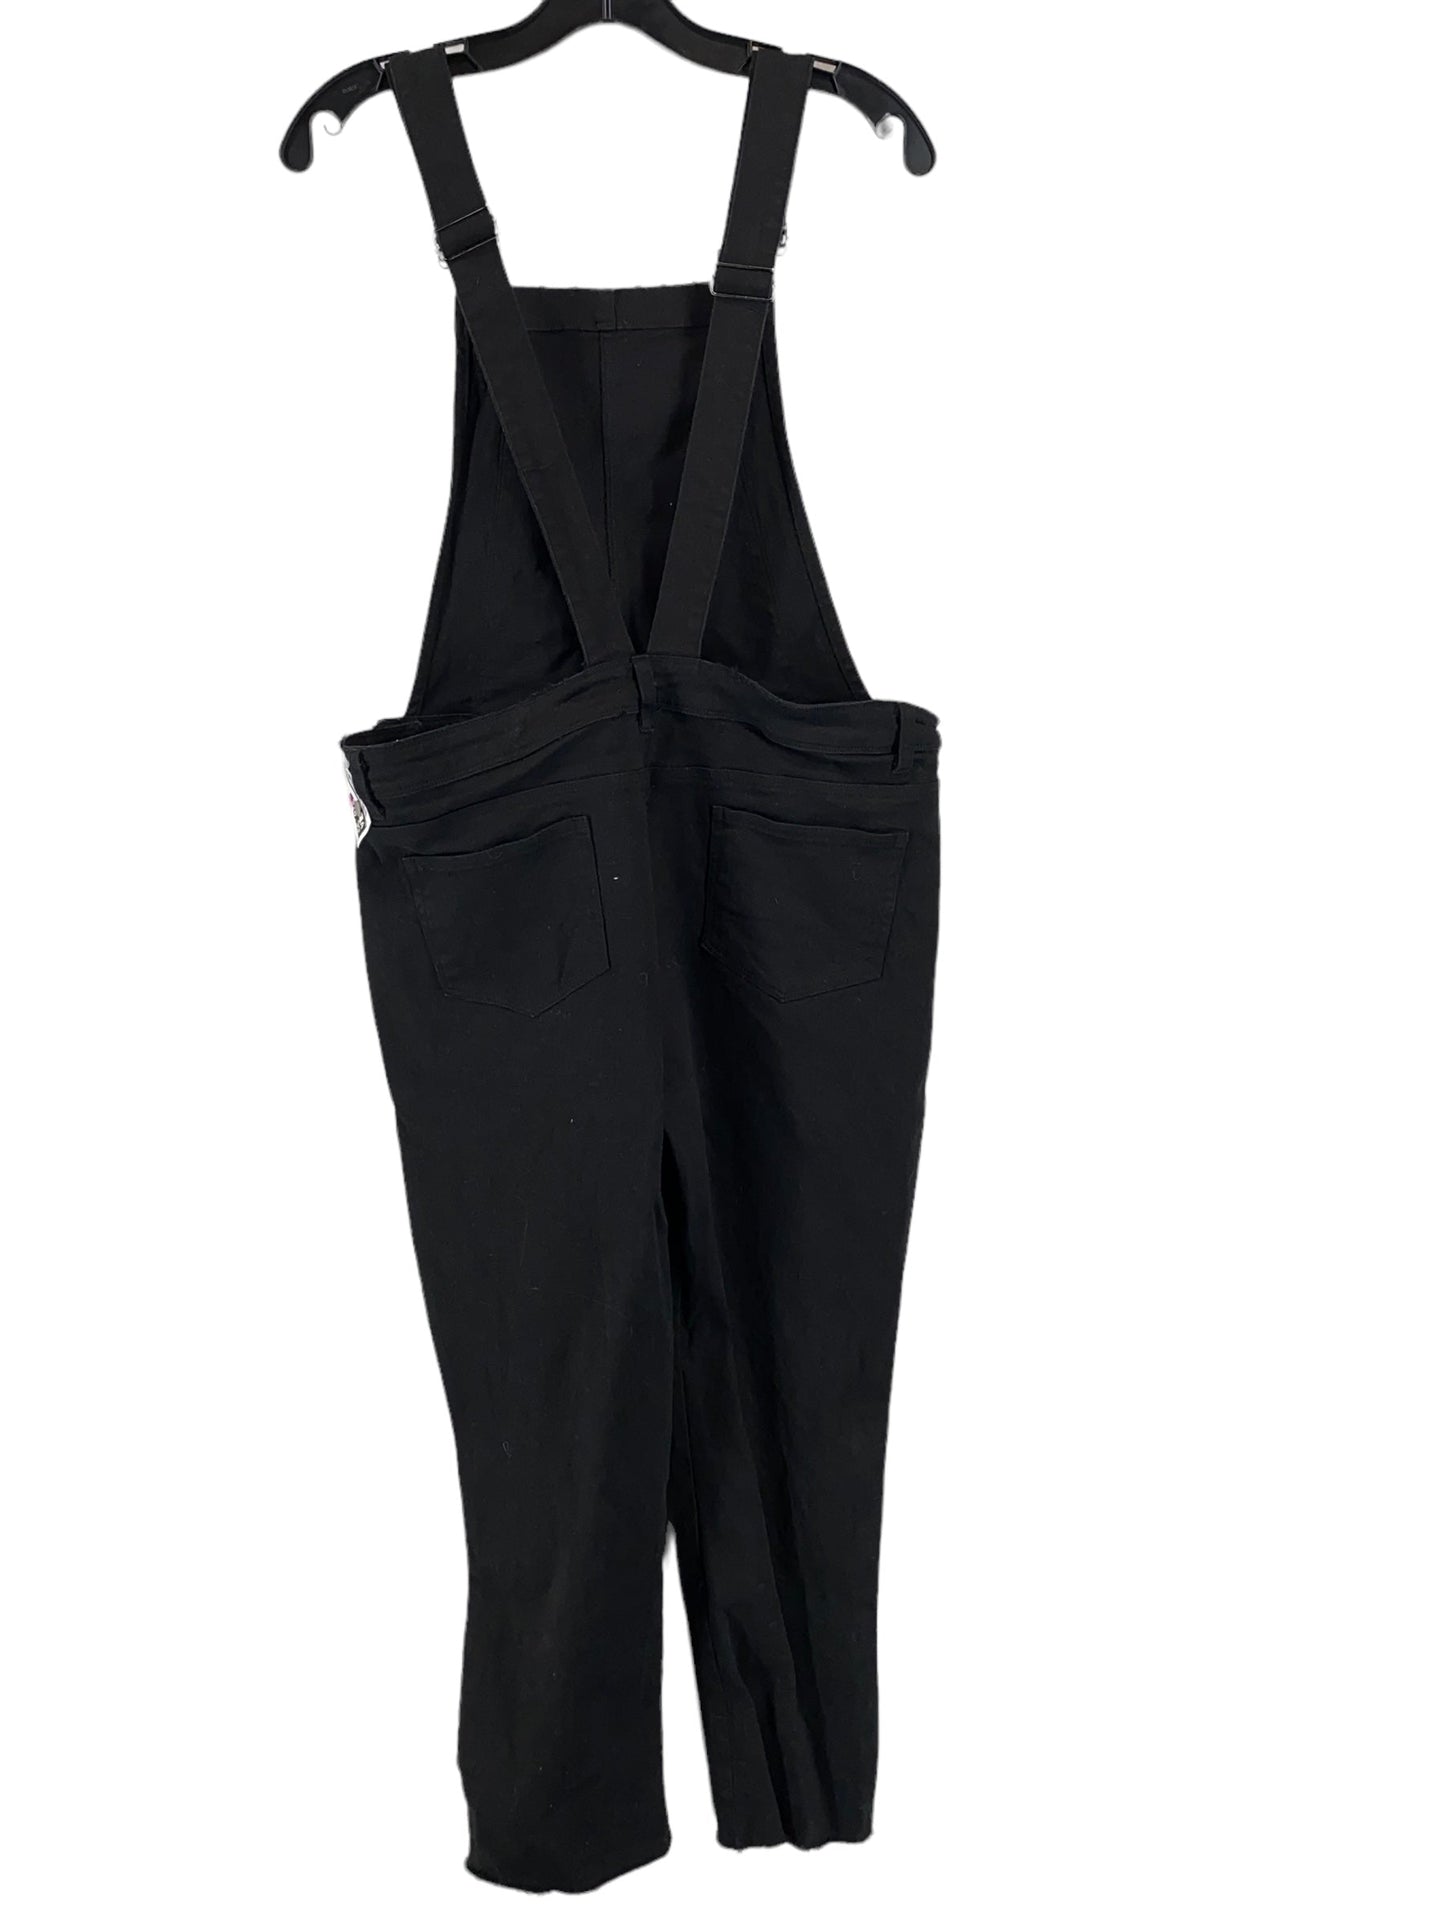 Overalls By Vici  Size: L